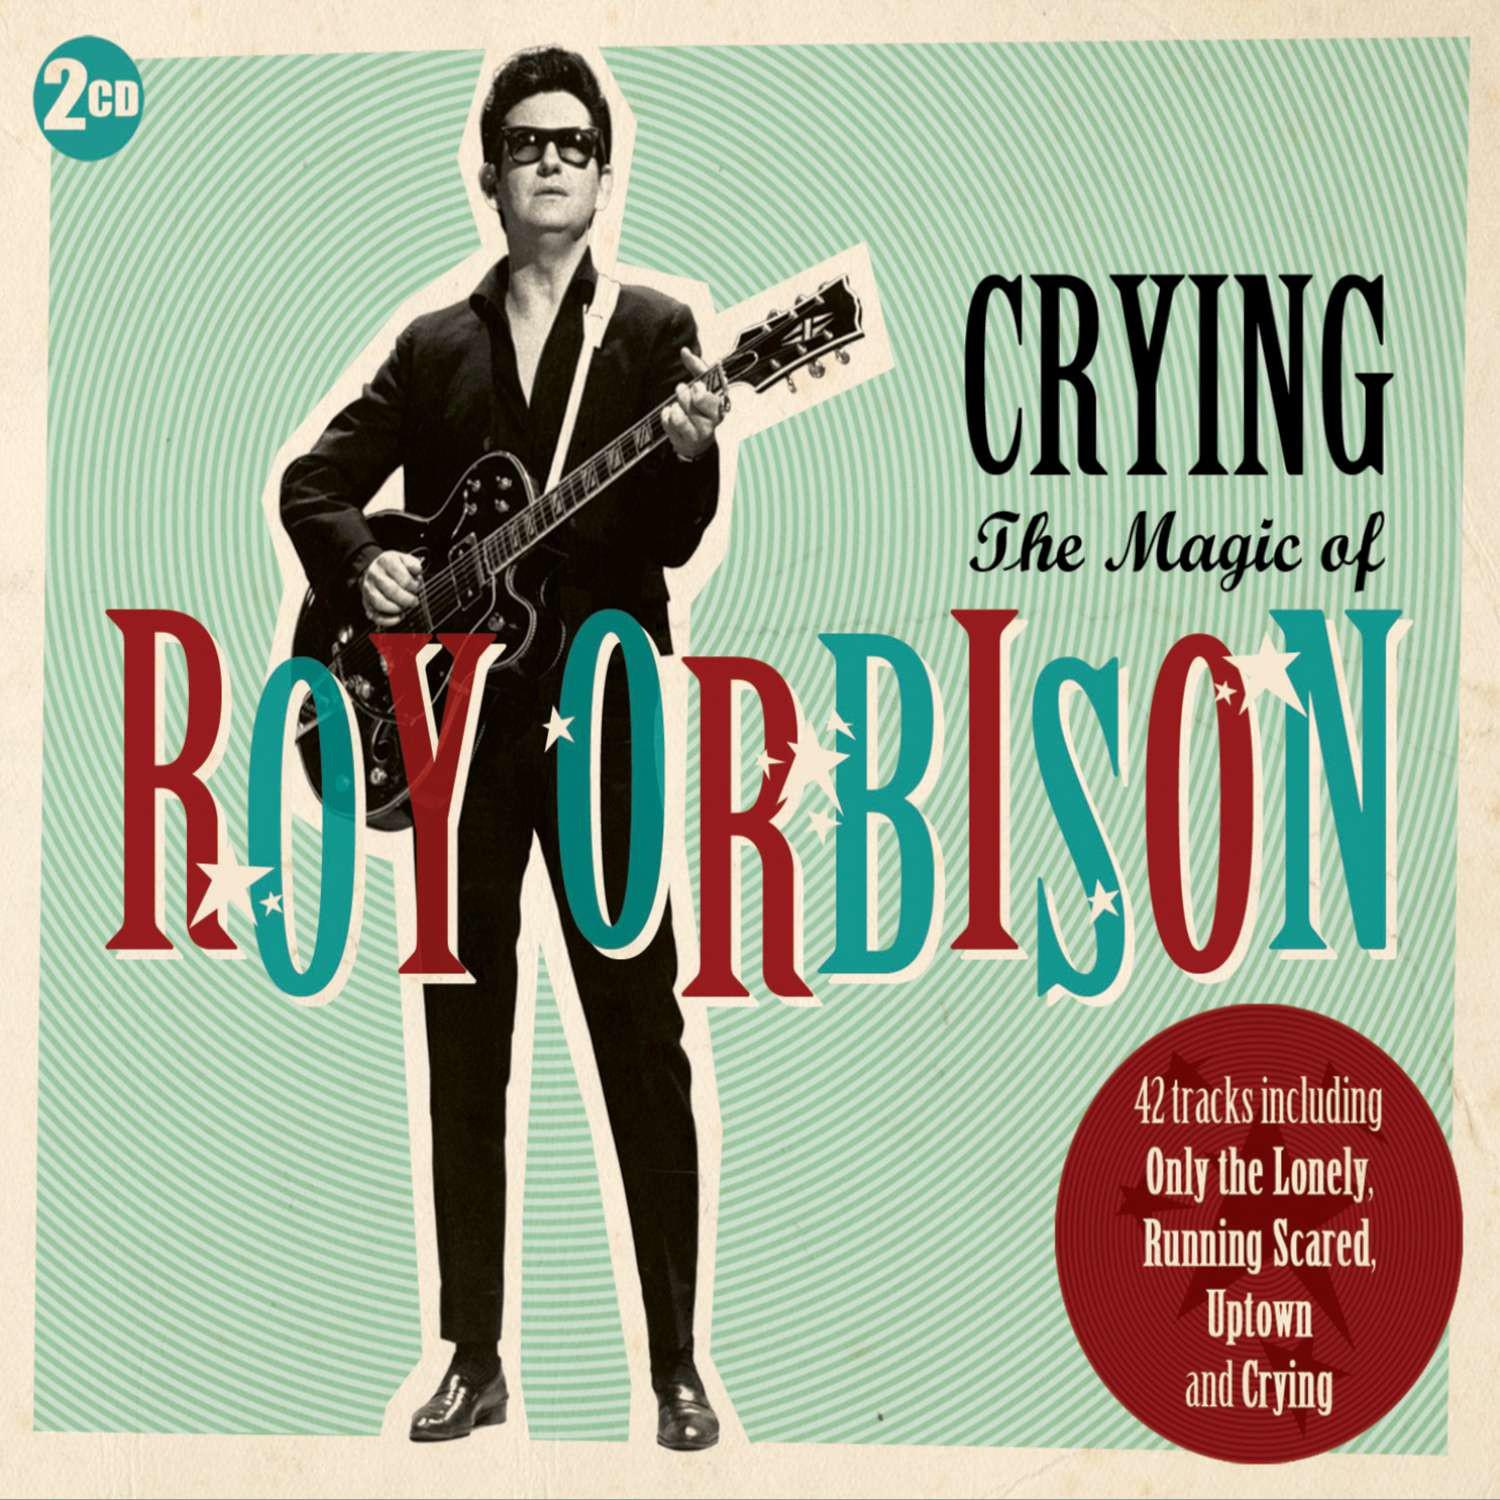 Crying - The Magic of Roy Orbison